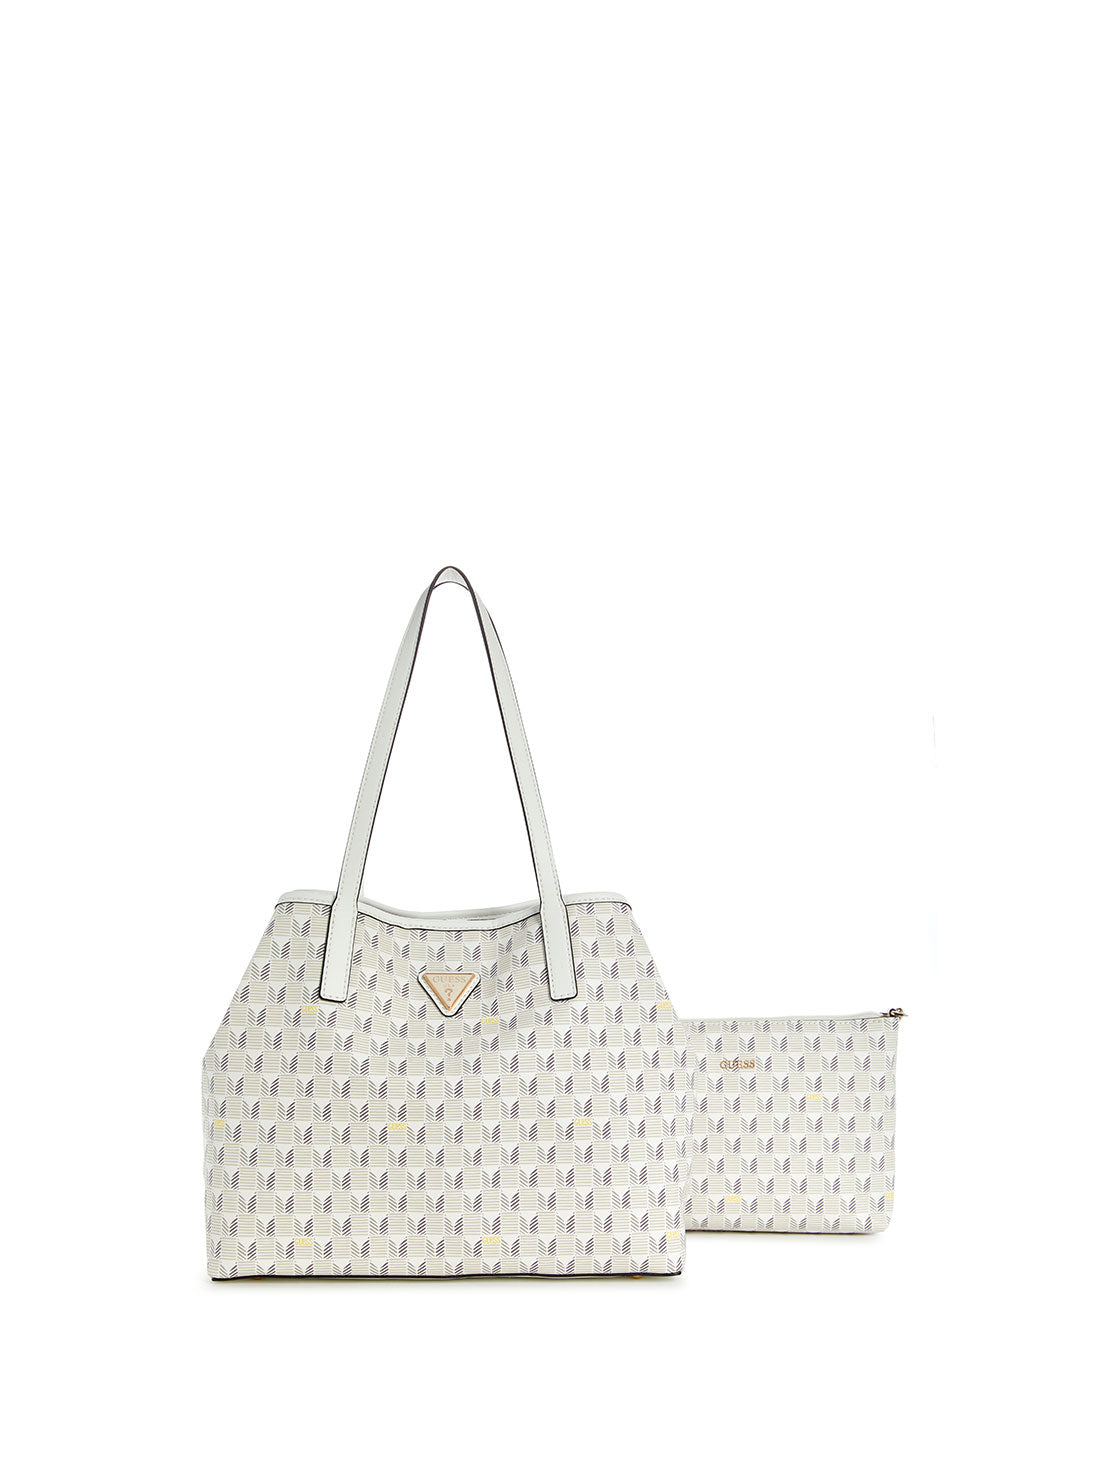 GUESS White Logo Vikky 2 in 1 Tote Bag back view